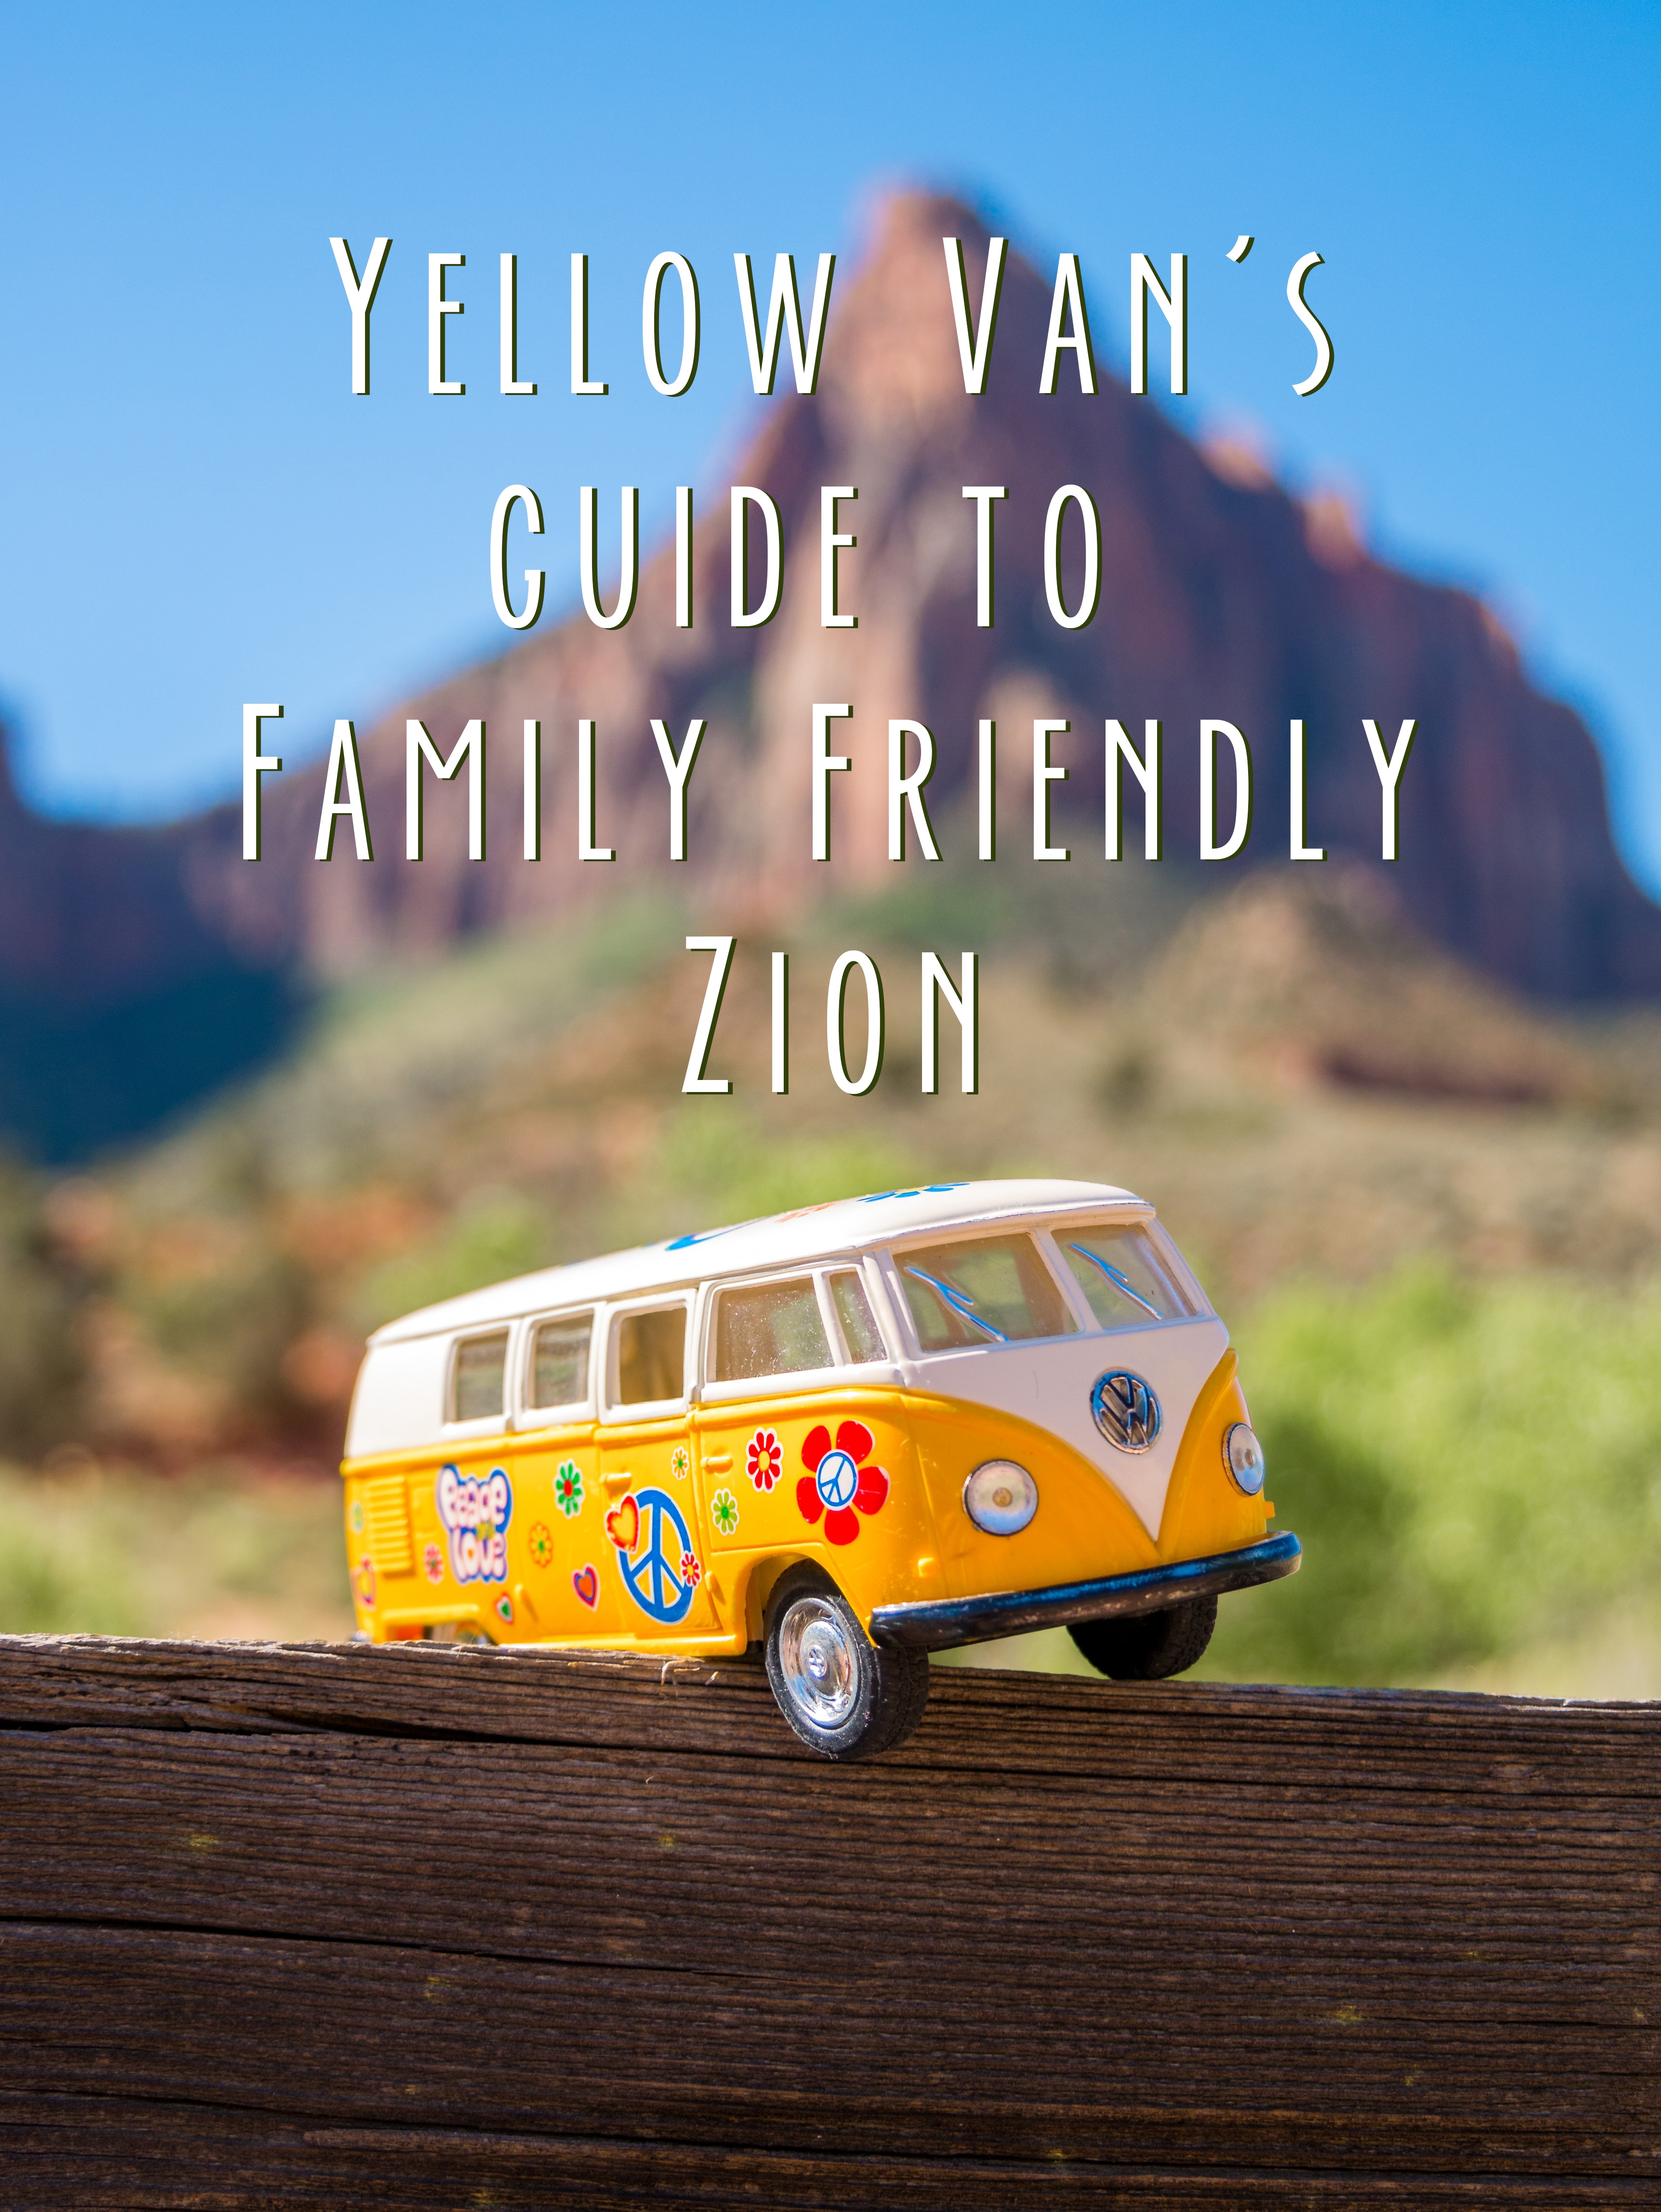 Title card showing the Yellow van with the text: Yellow Van's guide to Family Friendly Zion